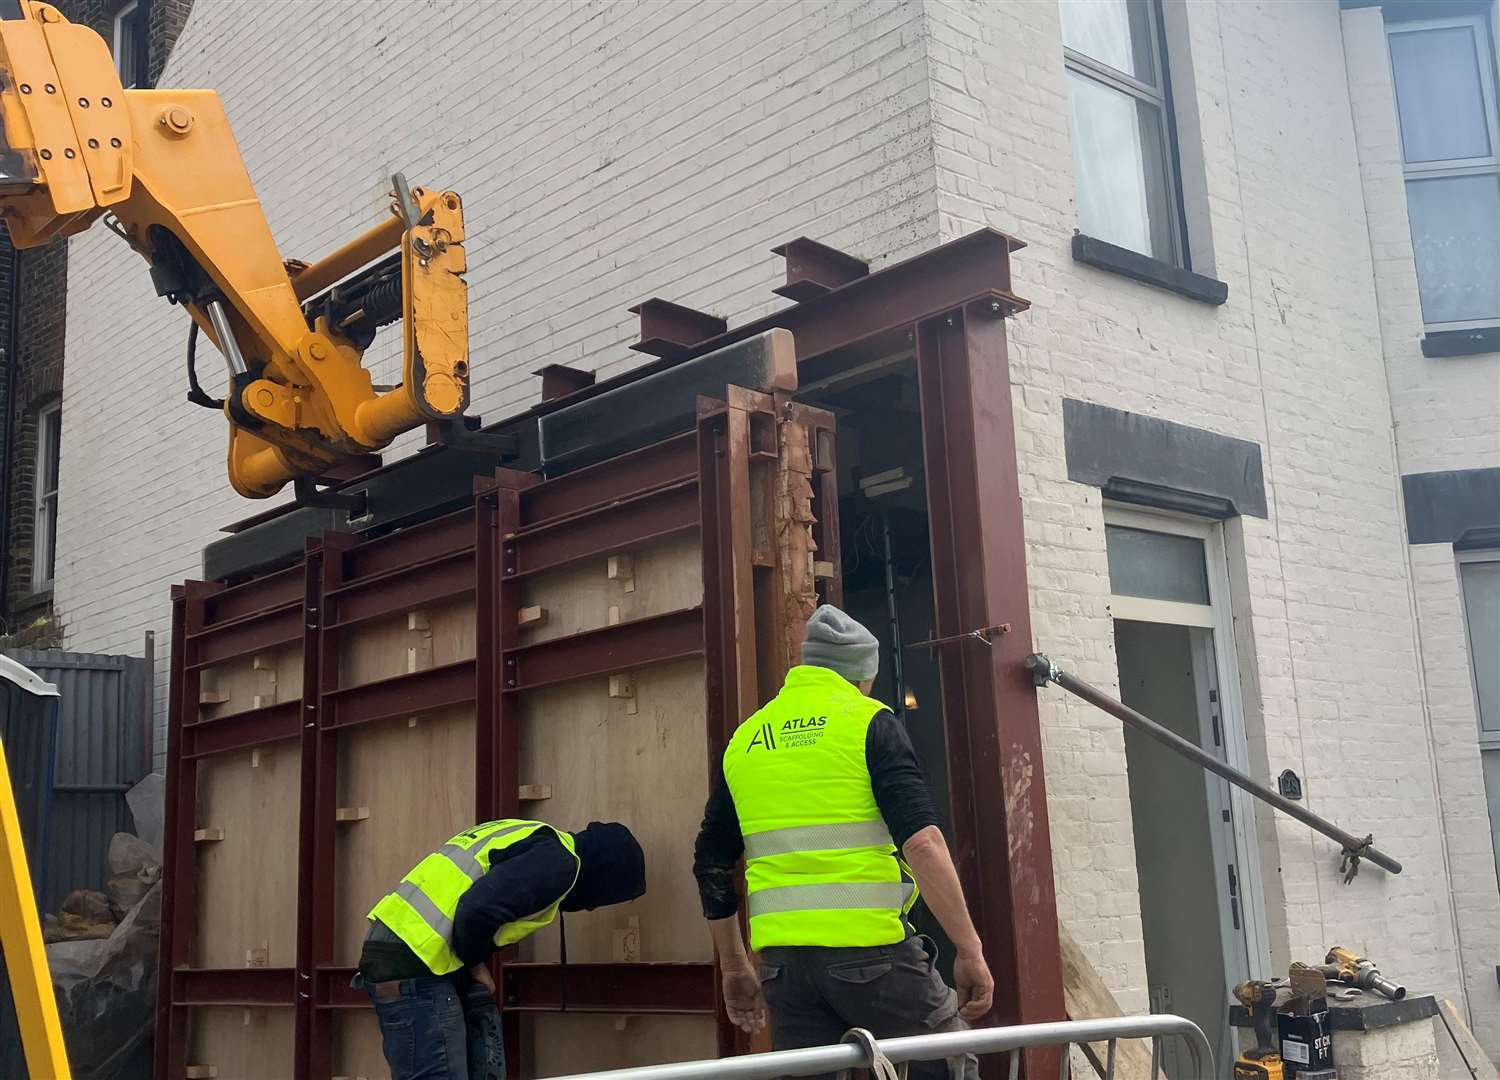 The Banksy artwork being removed from the Margate home. Picture: Bread and Butter PR